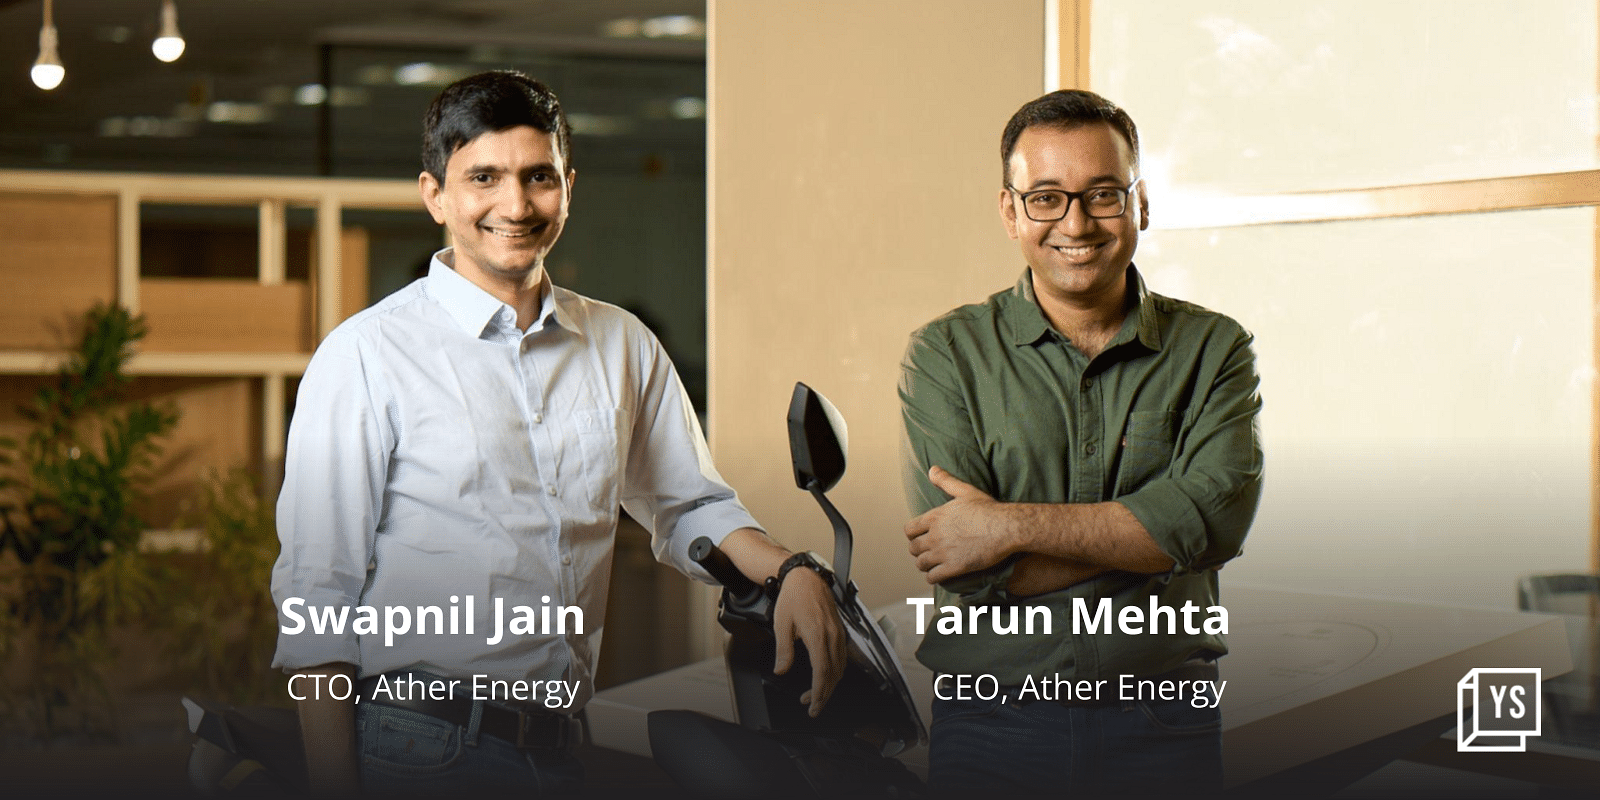 Ather Energy raises Rs 400.6 Cr funding led by Caladium Investment